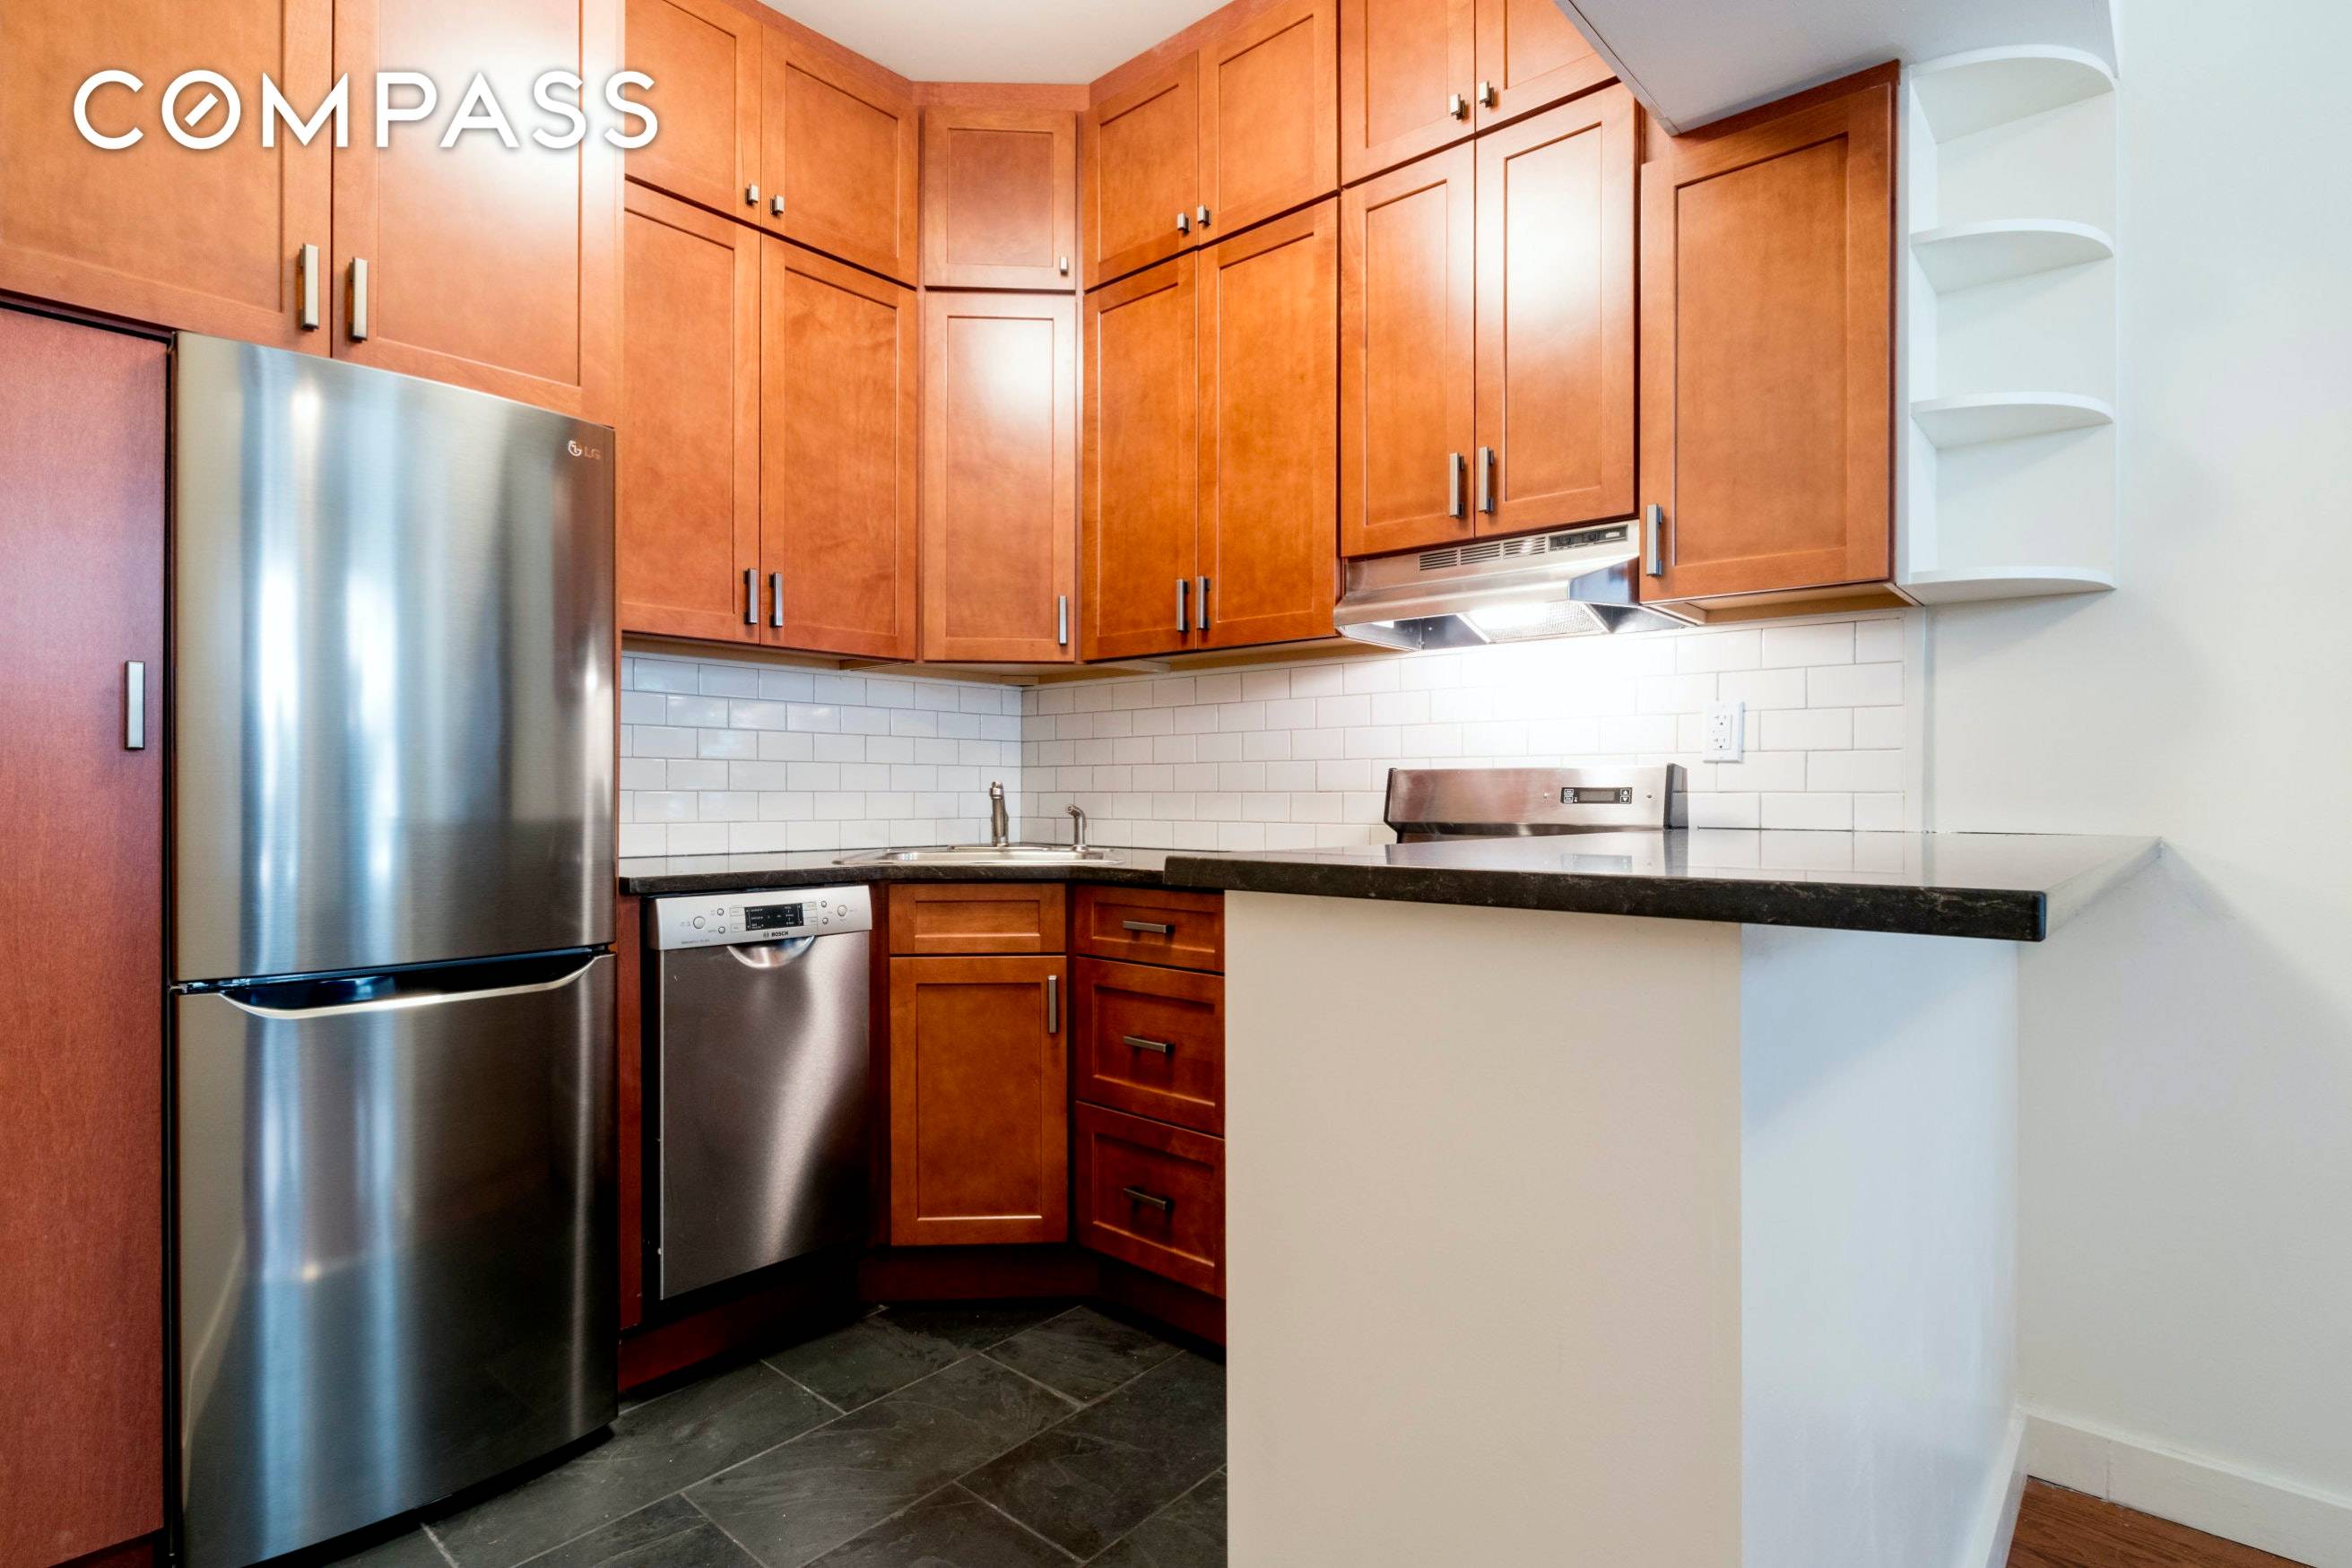 This lovely 2nd floor fully renovated apartment is boasting with charm with high 9'6 ceilings, exposed brick, decorative fireplace, hardwood floors, window blinds, city quiet windows, tons of storage, and ...